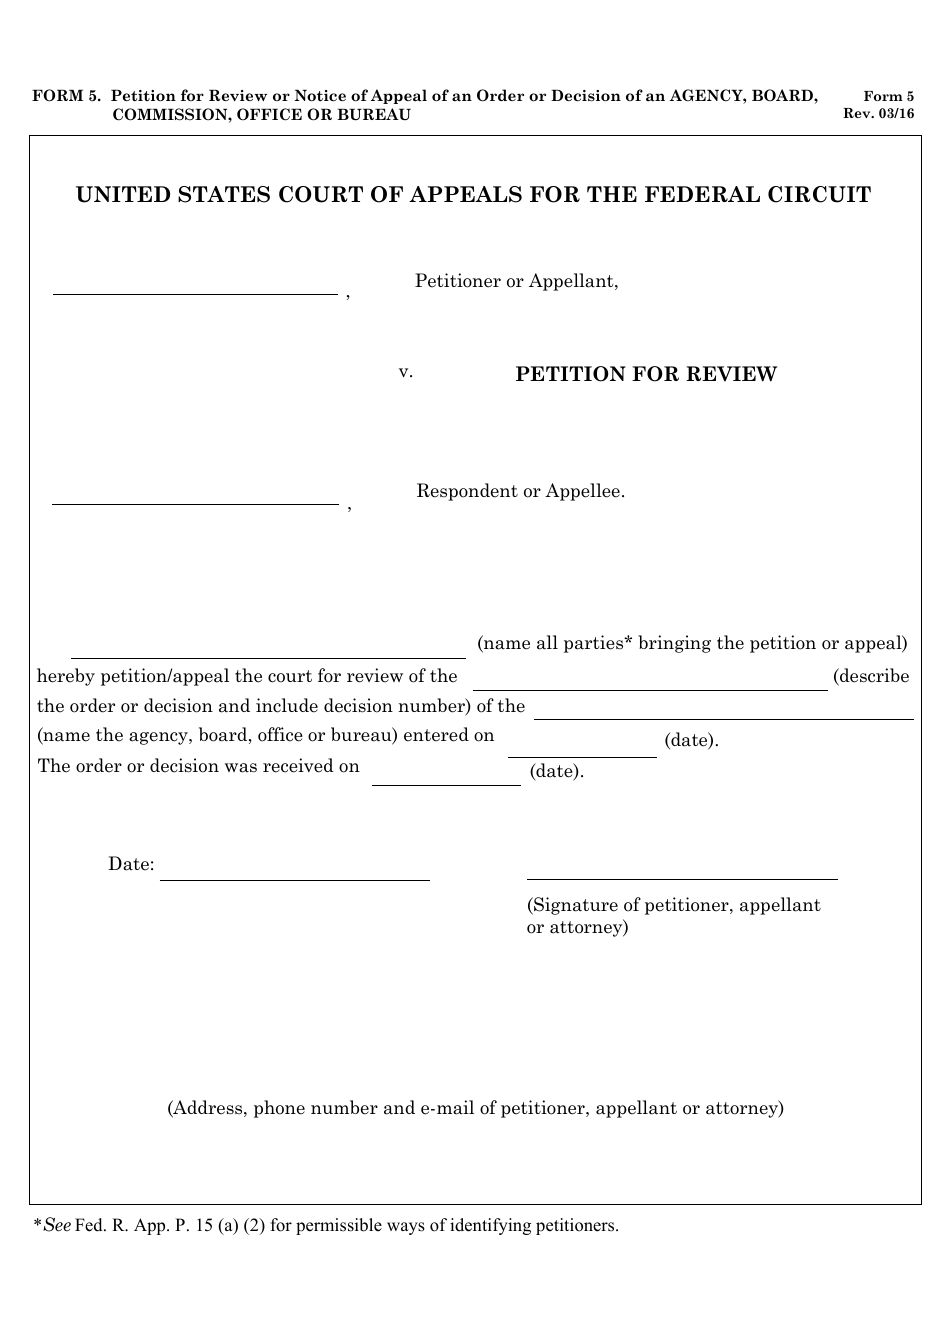 Form 5 Petition for Review or Appeal of an Order or Decision of an Agency, Board, Commission, or Officer, Page 1